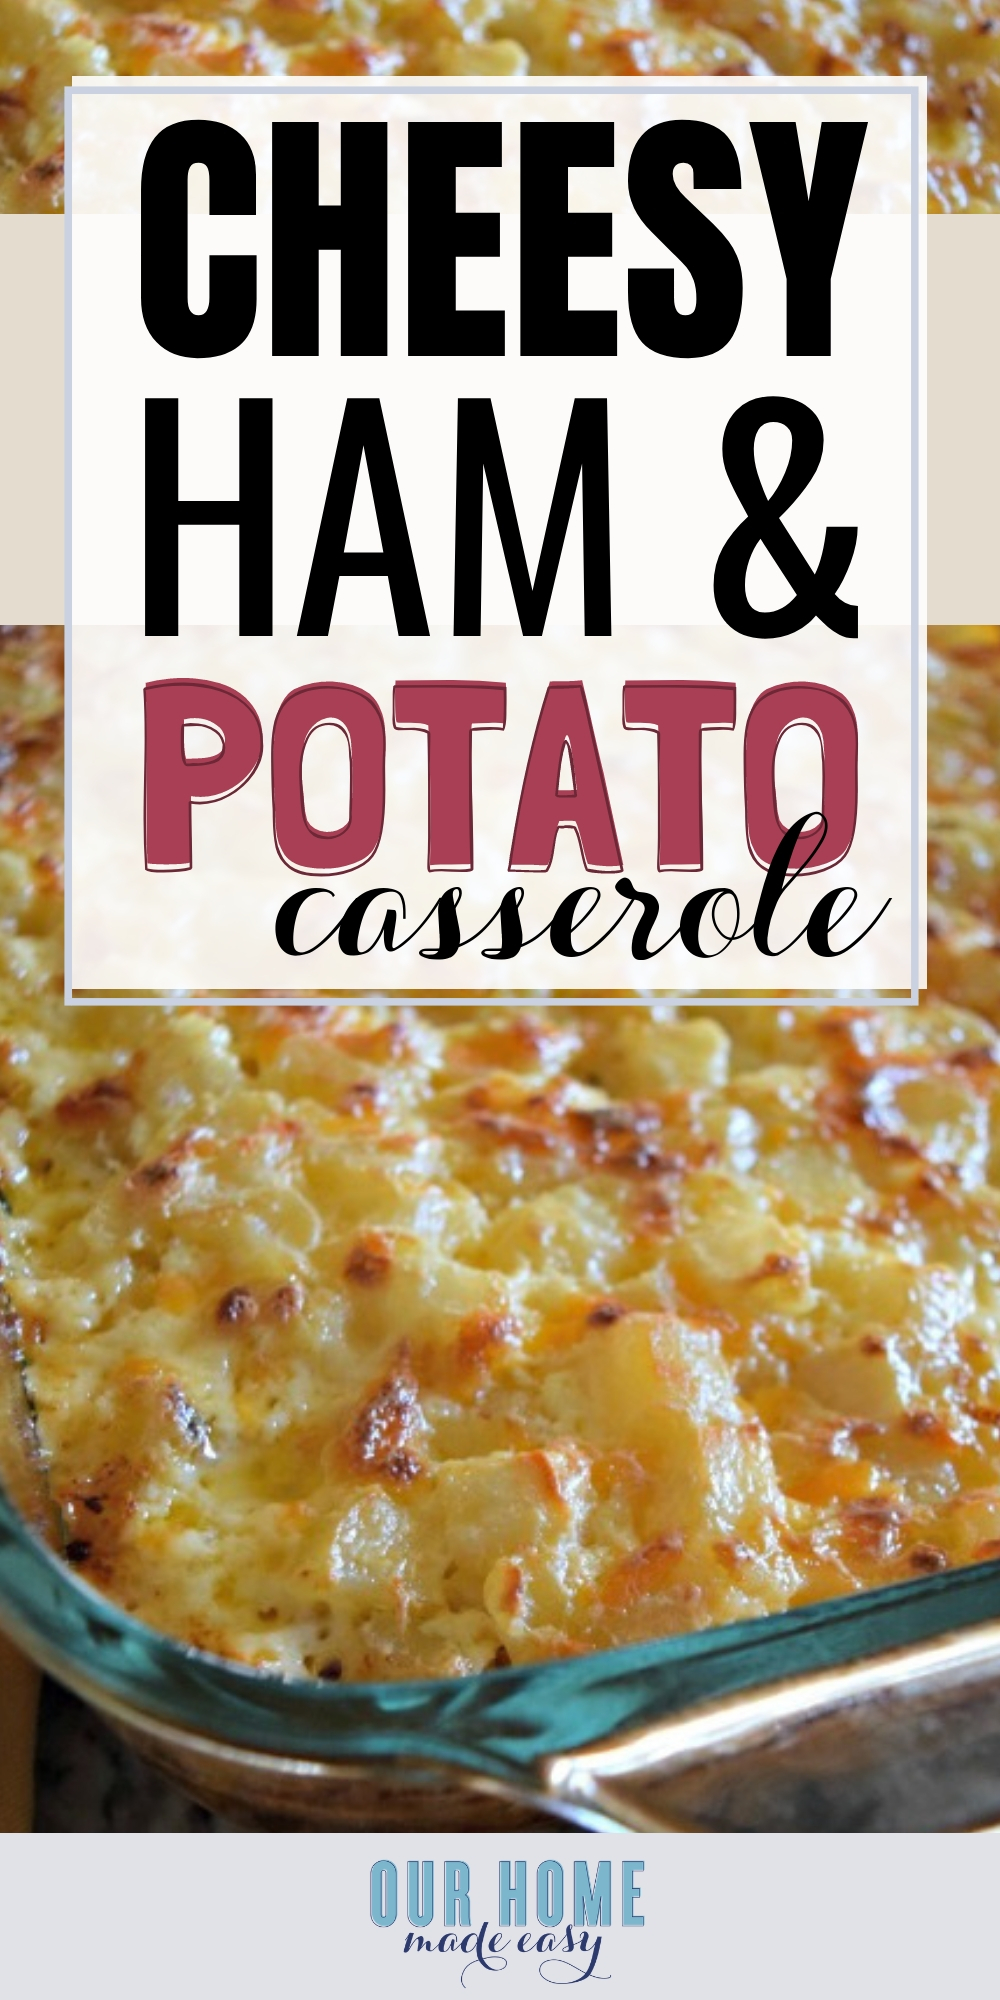 An easy recipe for cheesy potato casserole! It's perfect for making for parties and using leftover ham from holidays. Click to see the recipe!